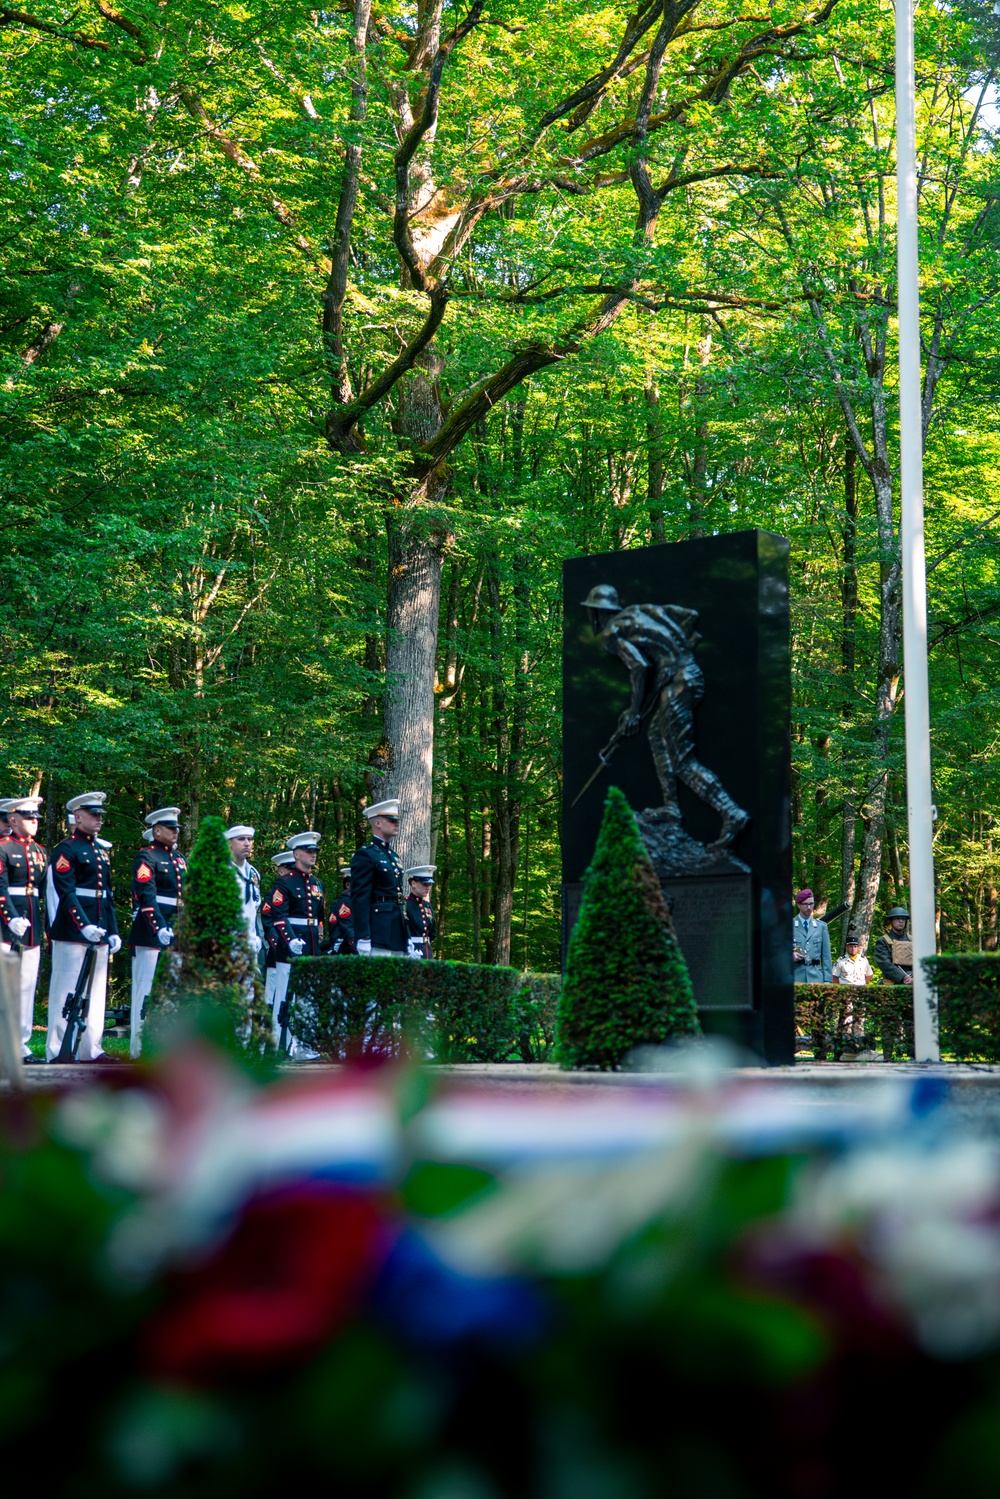 The 104th anniversary of the Battle of Belleau Wood